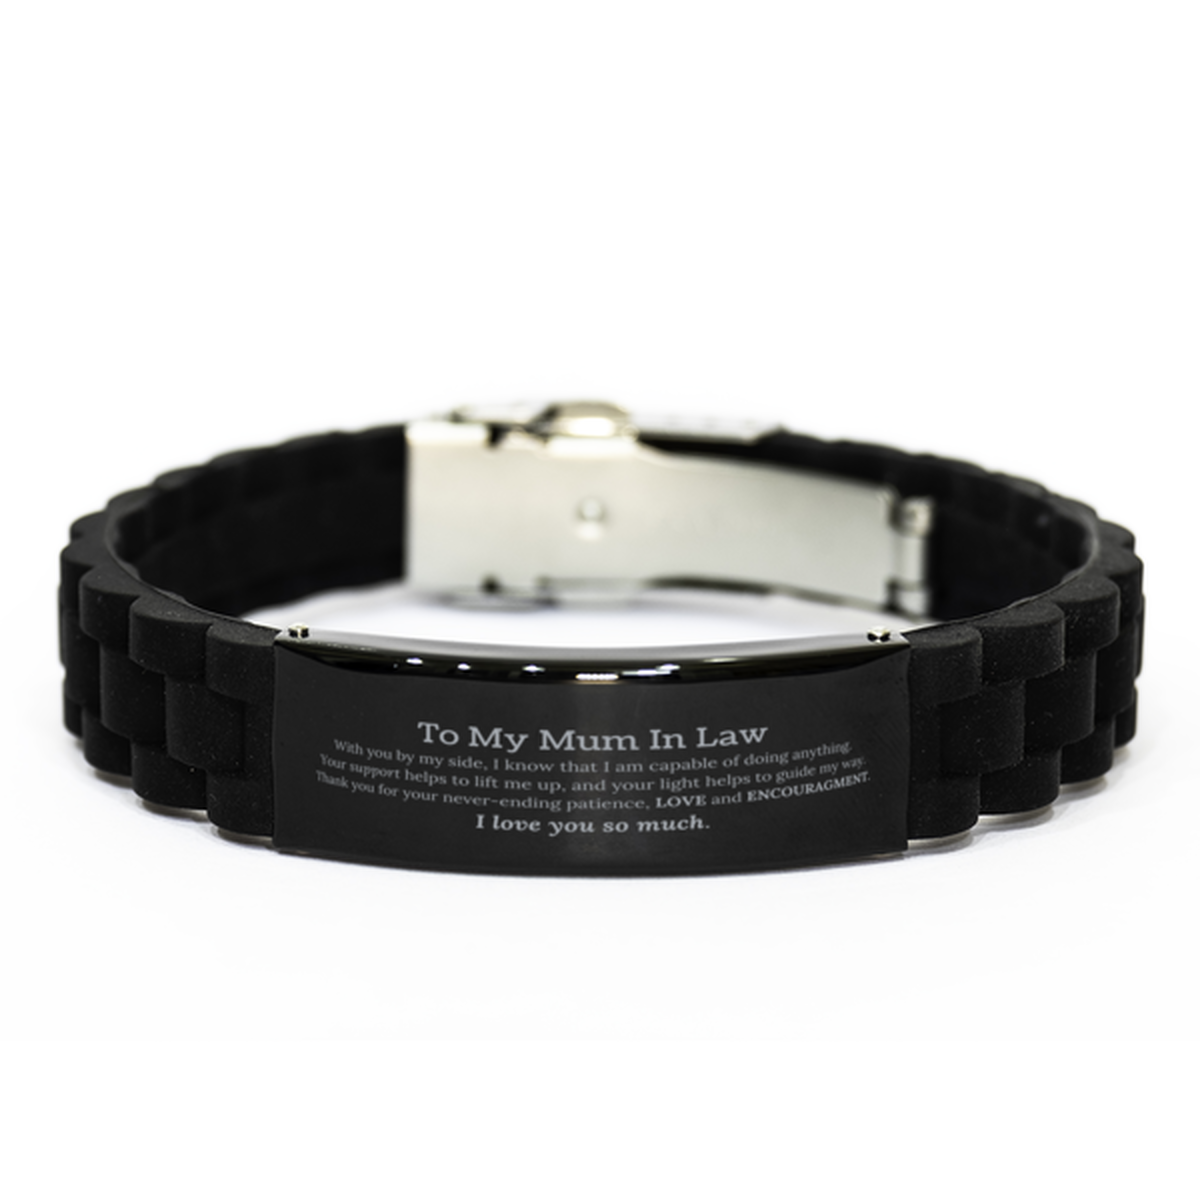 Appreciation Mum In Law  Black Glidelock Clasp Bracelet Gifts, To My Mum In Law  Birthday Christmas Wedding Keepsake Gifts for Mum In Law  With you by my side, I know that I am capable of doing anything. I love you so much